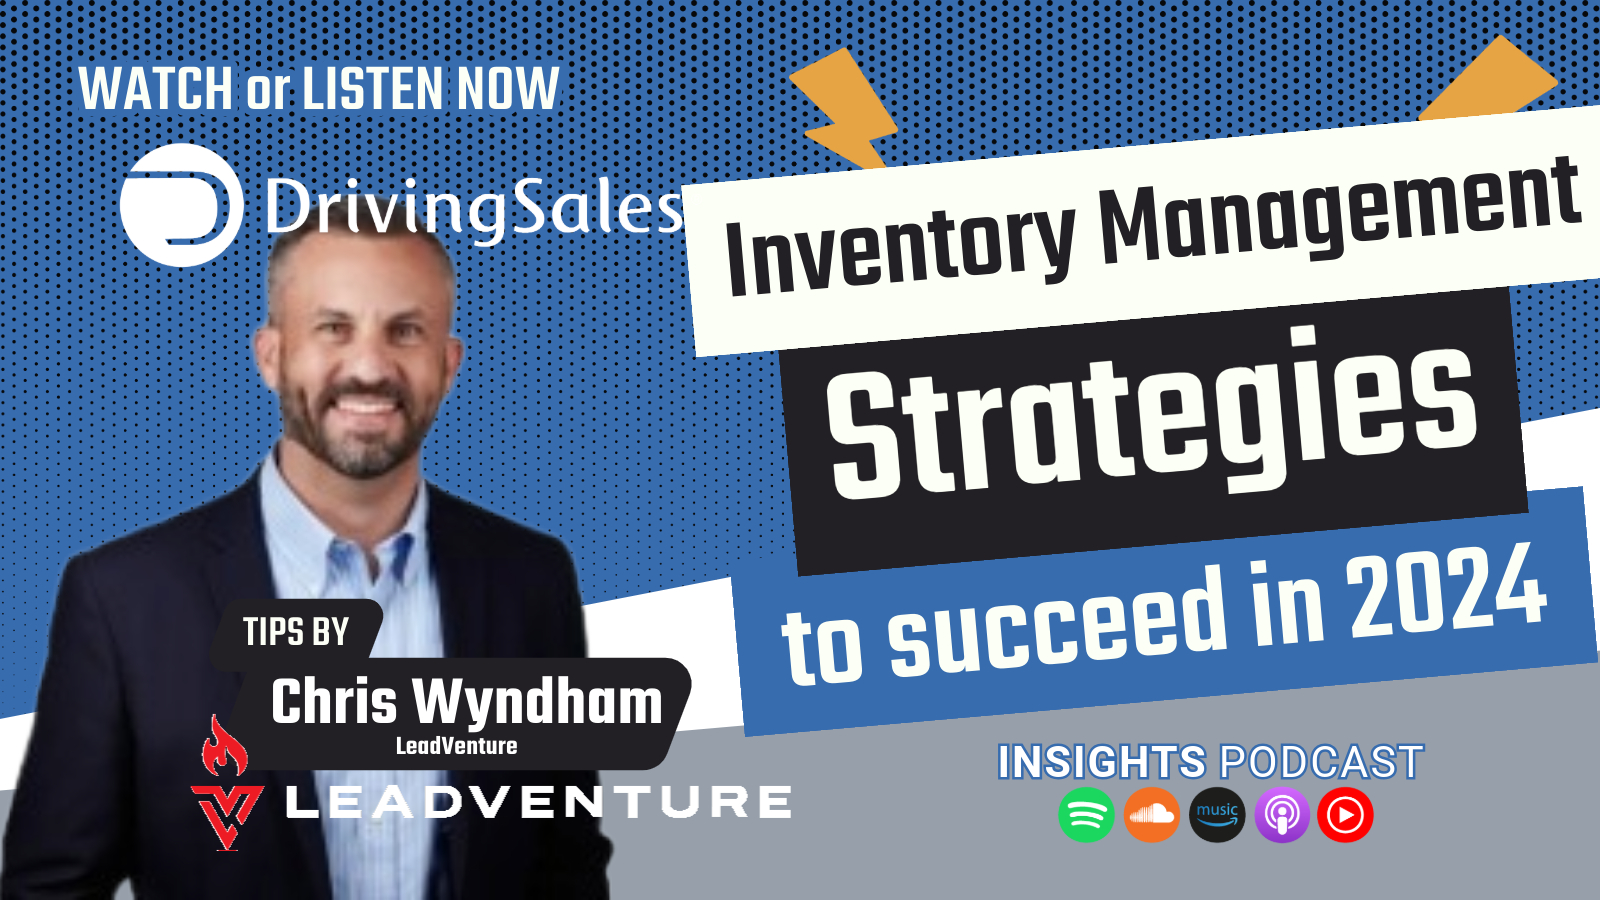 Chris Wyndham of LeadVenture discusses Inventory Management Strategies to succeed in 2024 on the DrivingSales Insights Podcast. The image features Chris Wyndham smiling in a suit, with text highlighting tips for car dealership inventory management strategies.